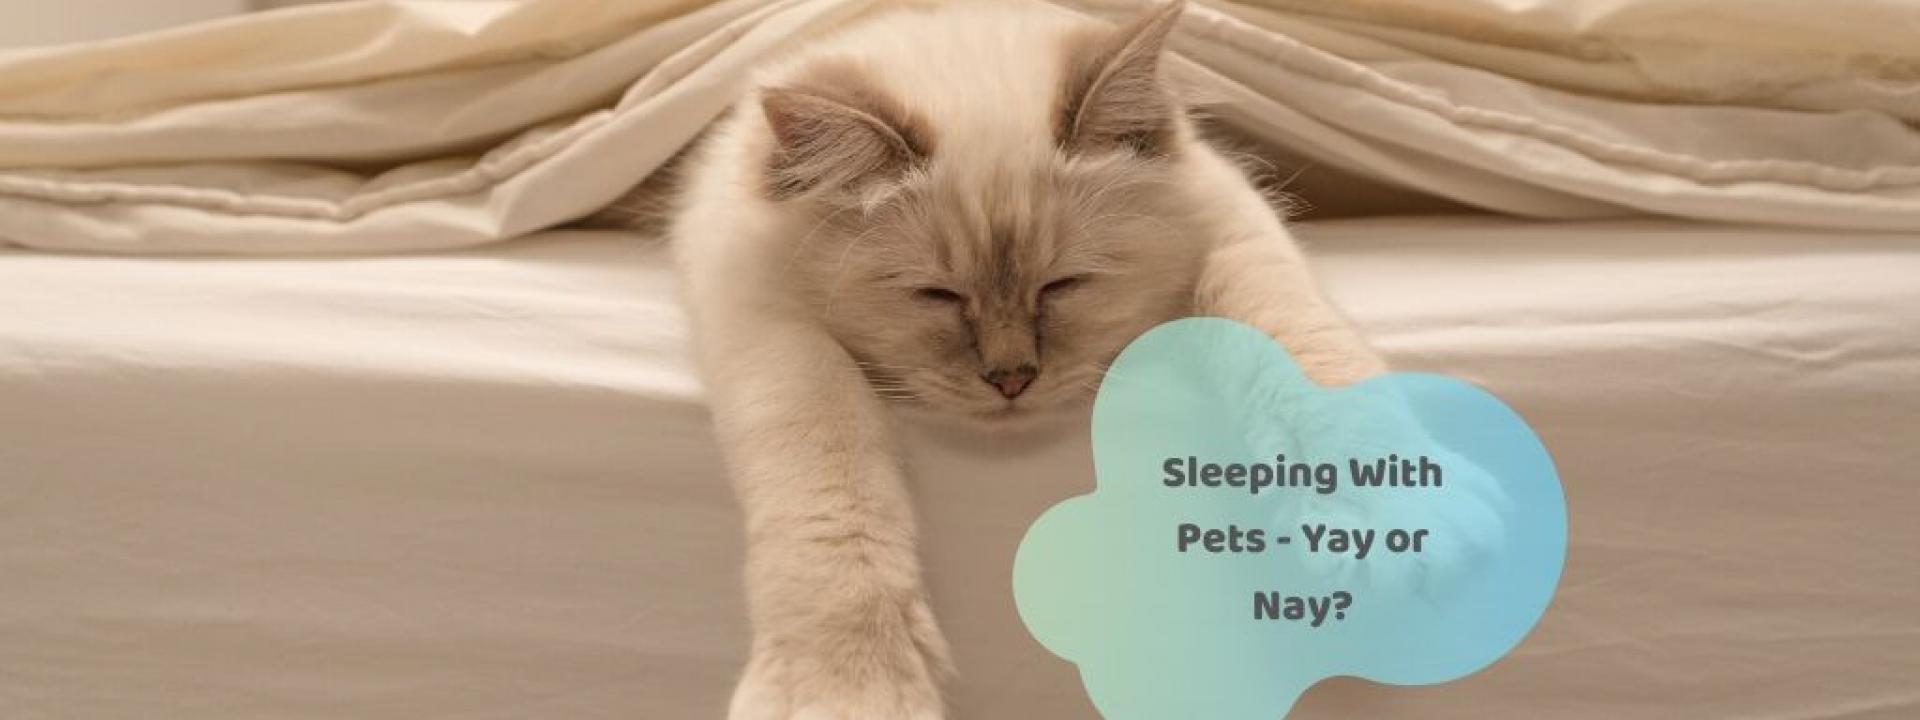 sleeping-with-pets-possible-health-issues.jpg